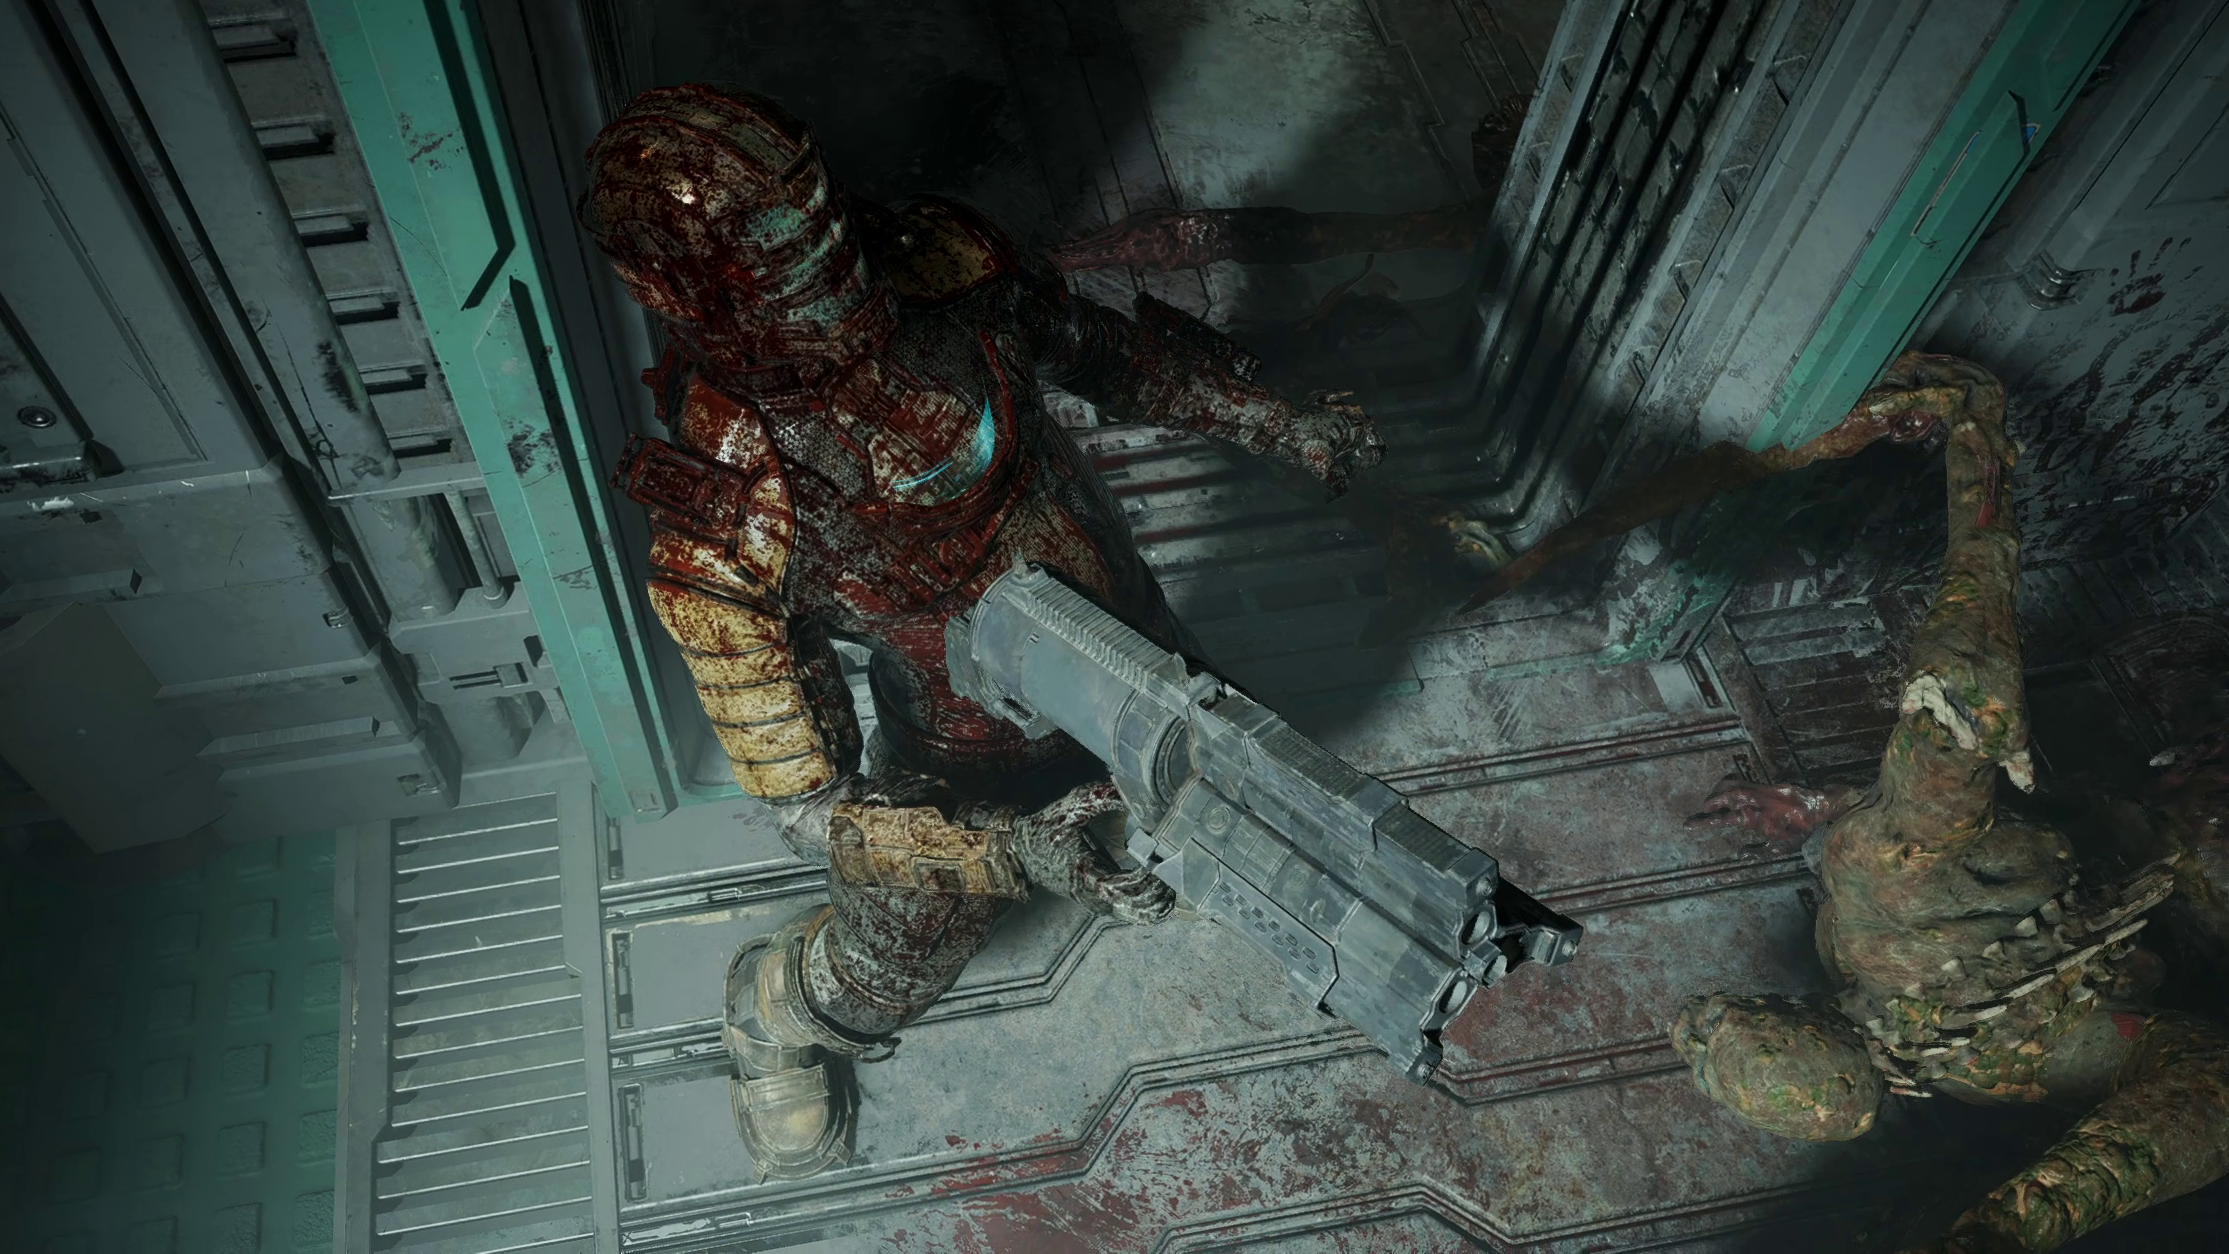 Playing the Dead Space remake made me realize I totally misremembered Dead Space